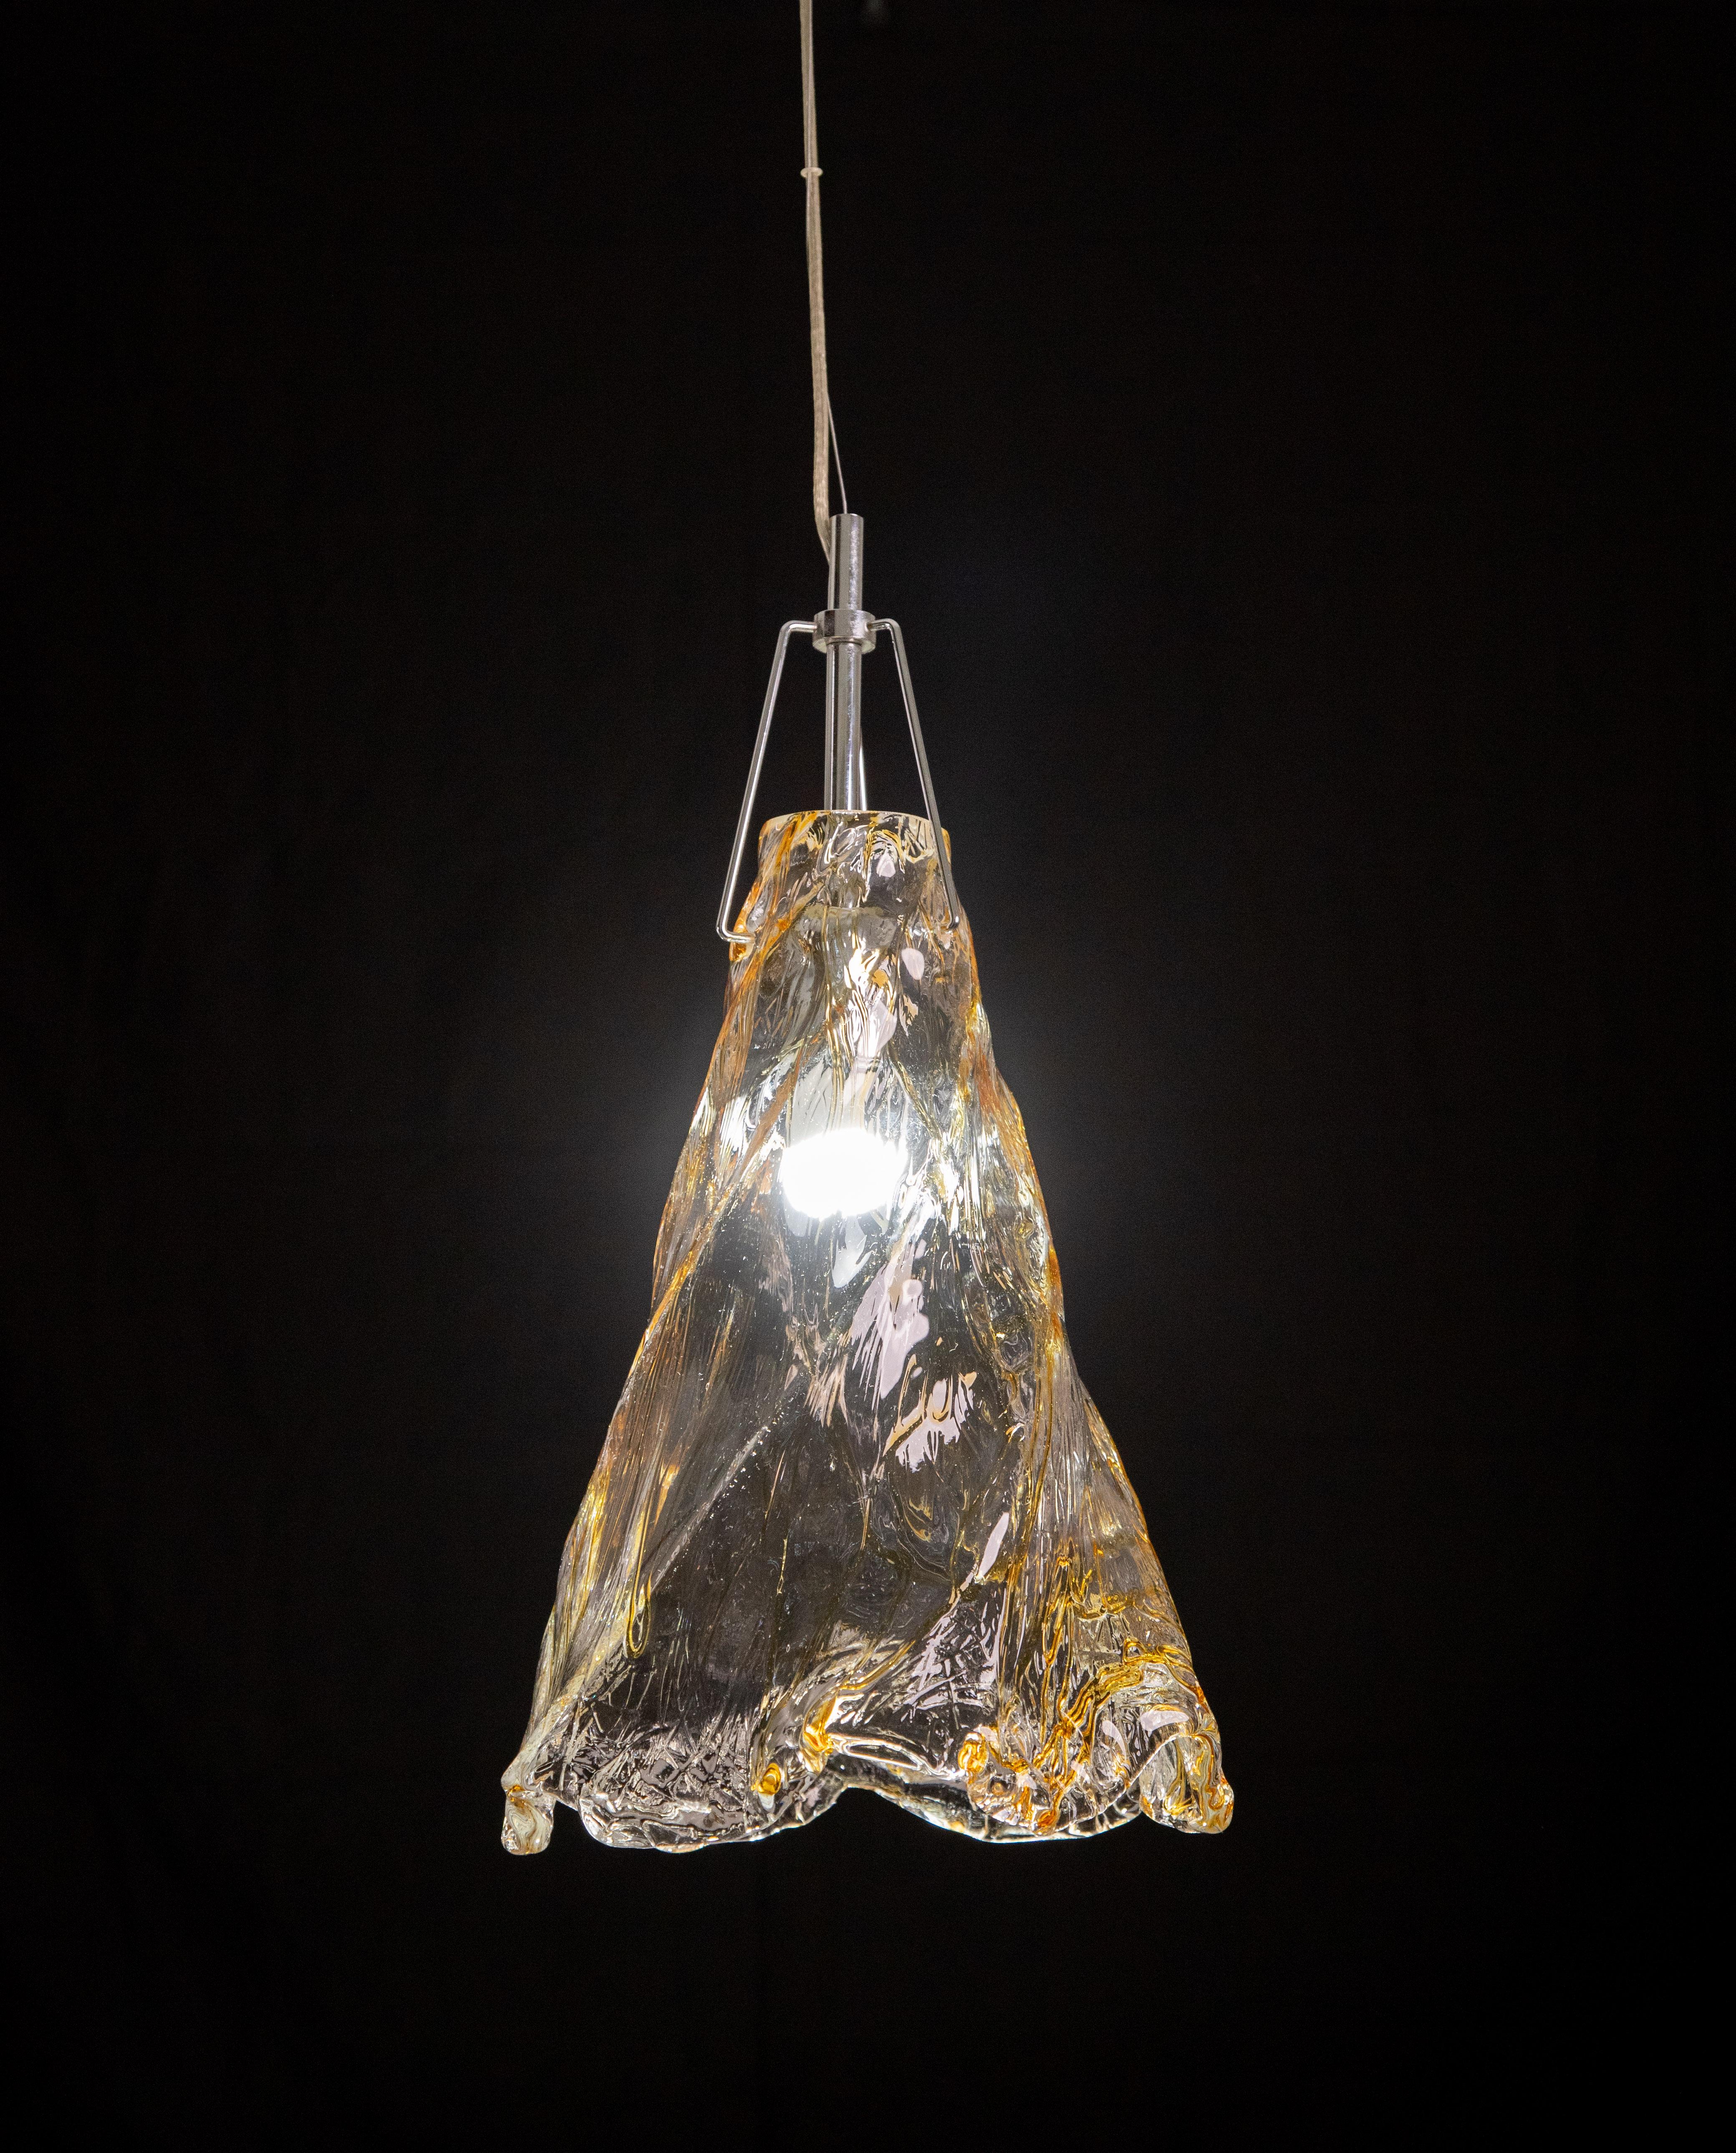 Pretty cone-shaped ceiling lamp with gold-blown Murano glass.
Accommodates an E27 bulb, European standard.
30 cm diameter
90 cm high
60 cm without chain.